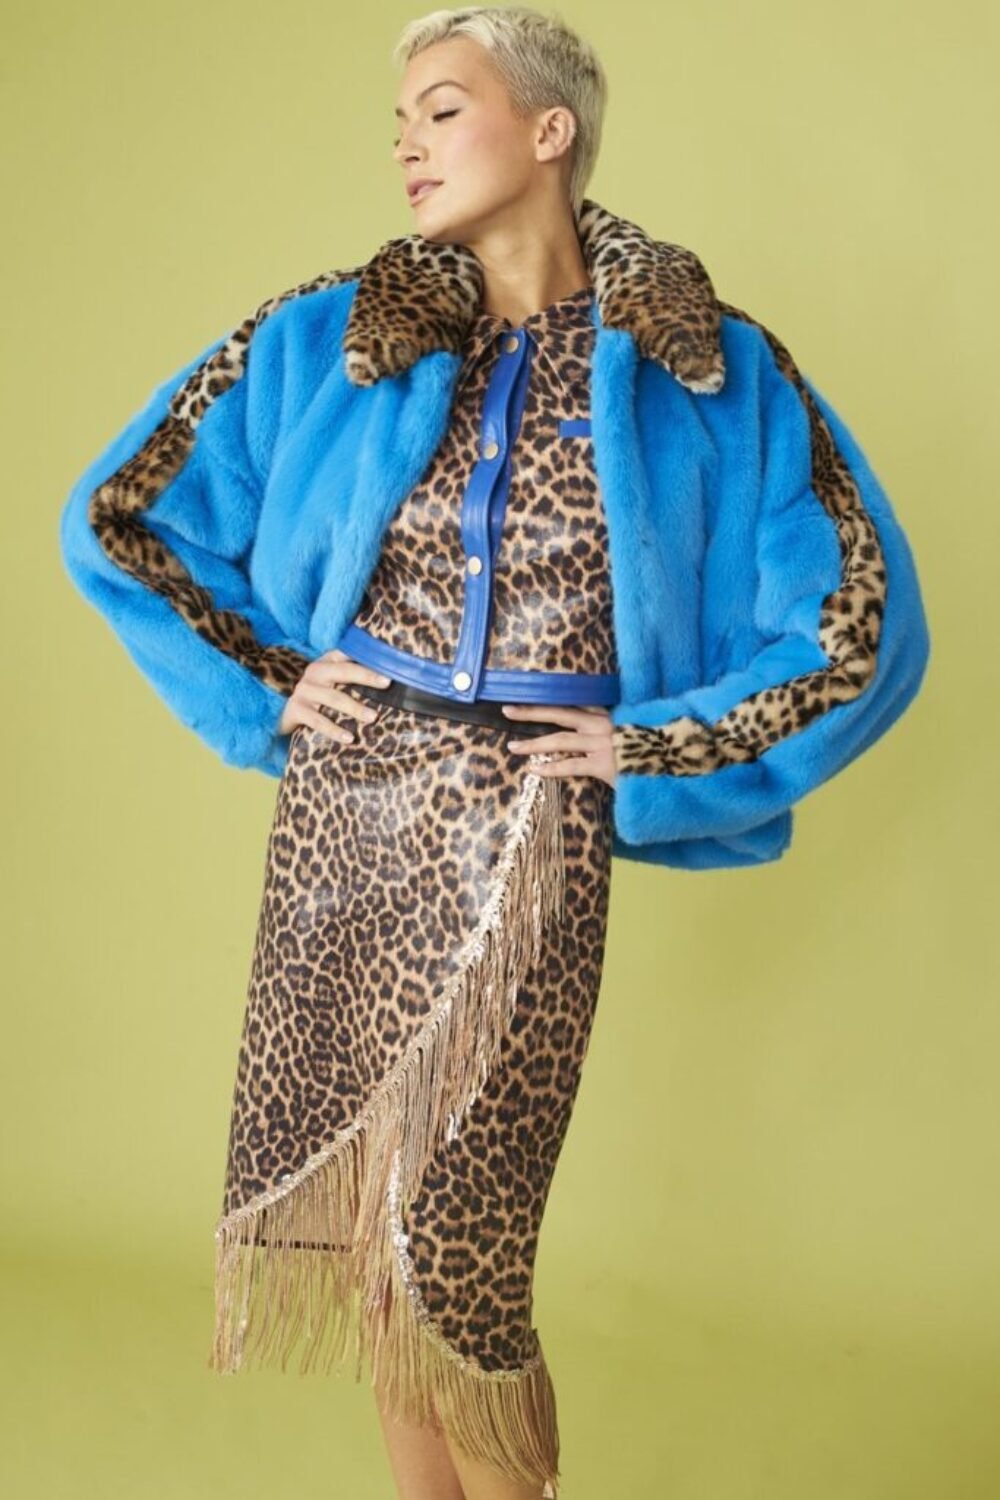 Shop Lux Blue and Leopard Print Faux Fur Coat and women's luxury and designer clothes at www.lux-apparel.co.uk